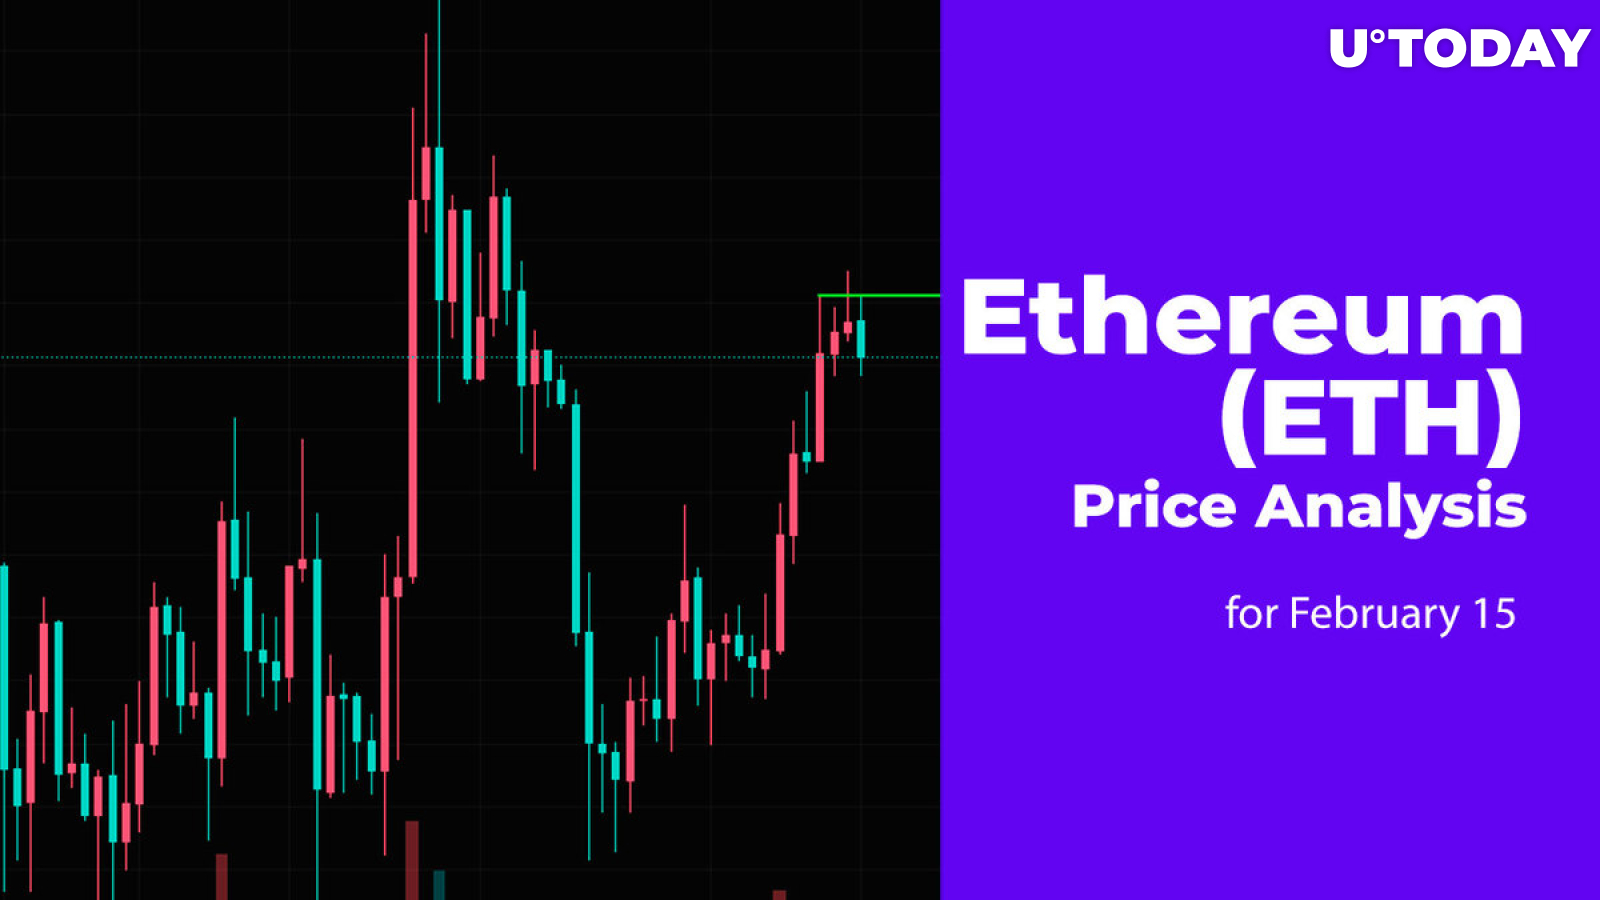 Ethereum (ETH) Price Prediction for February 15